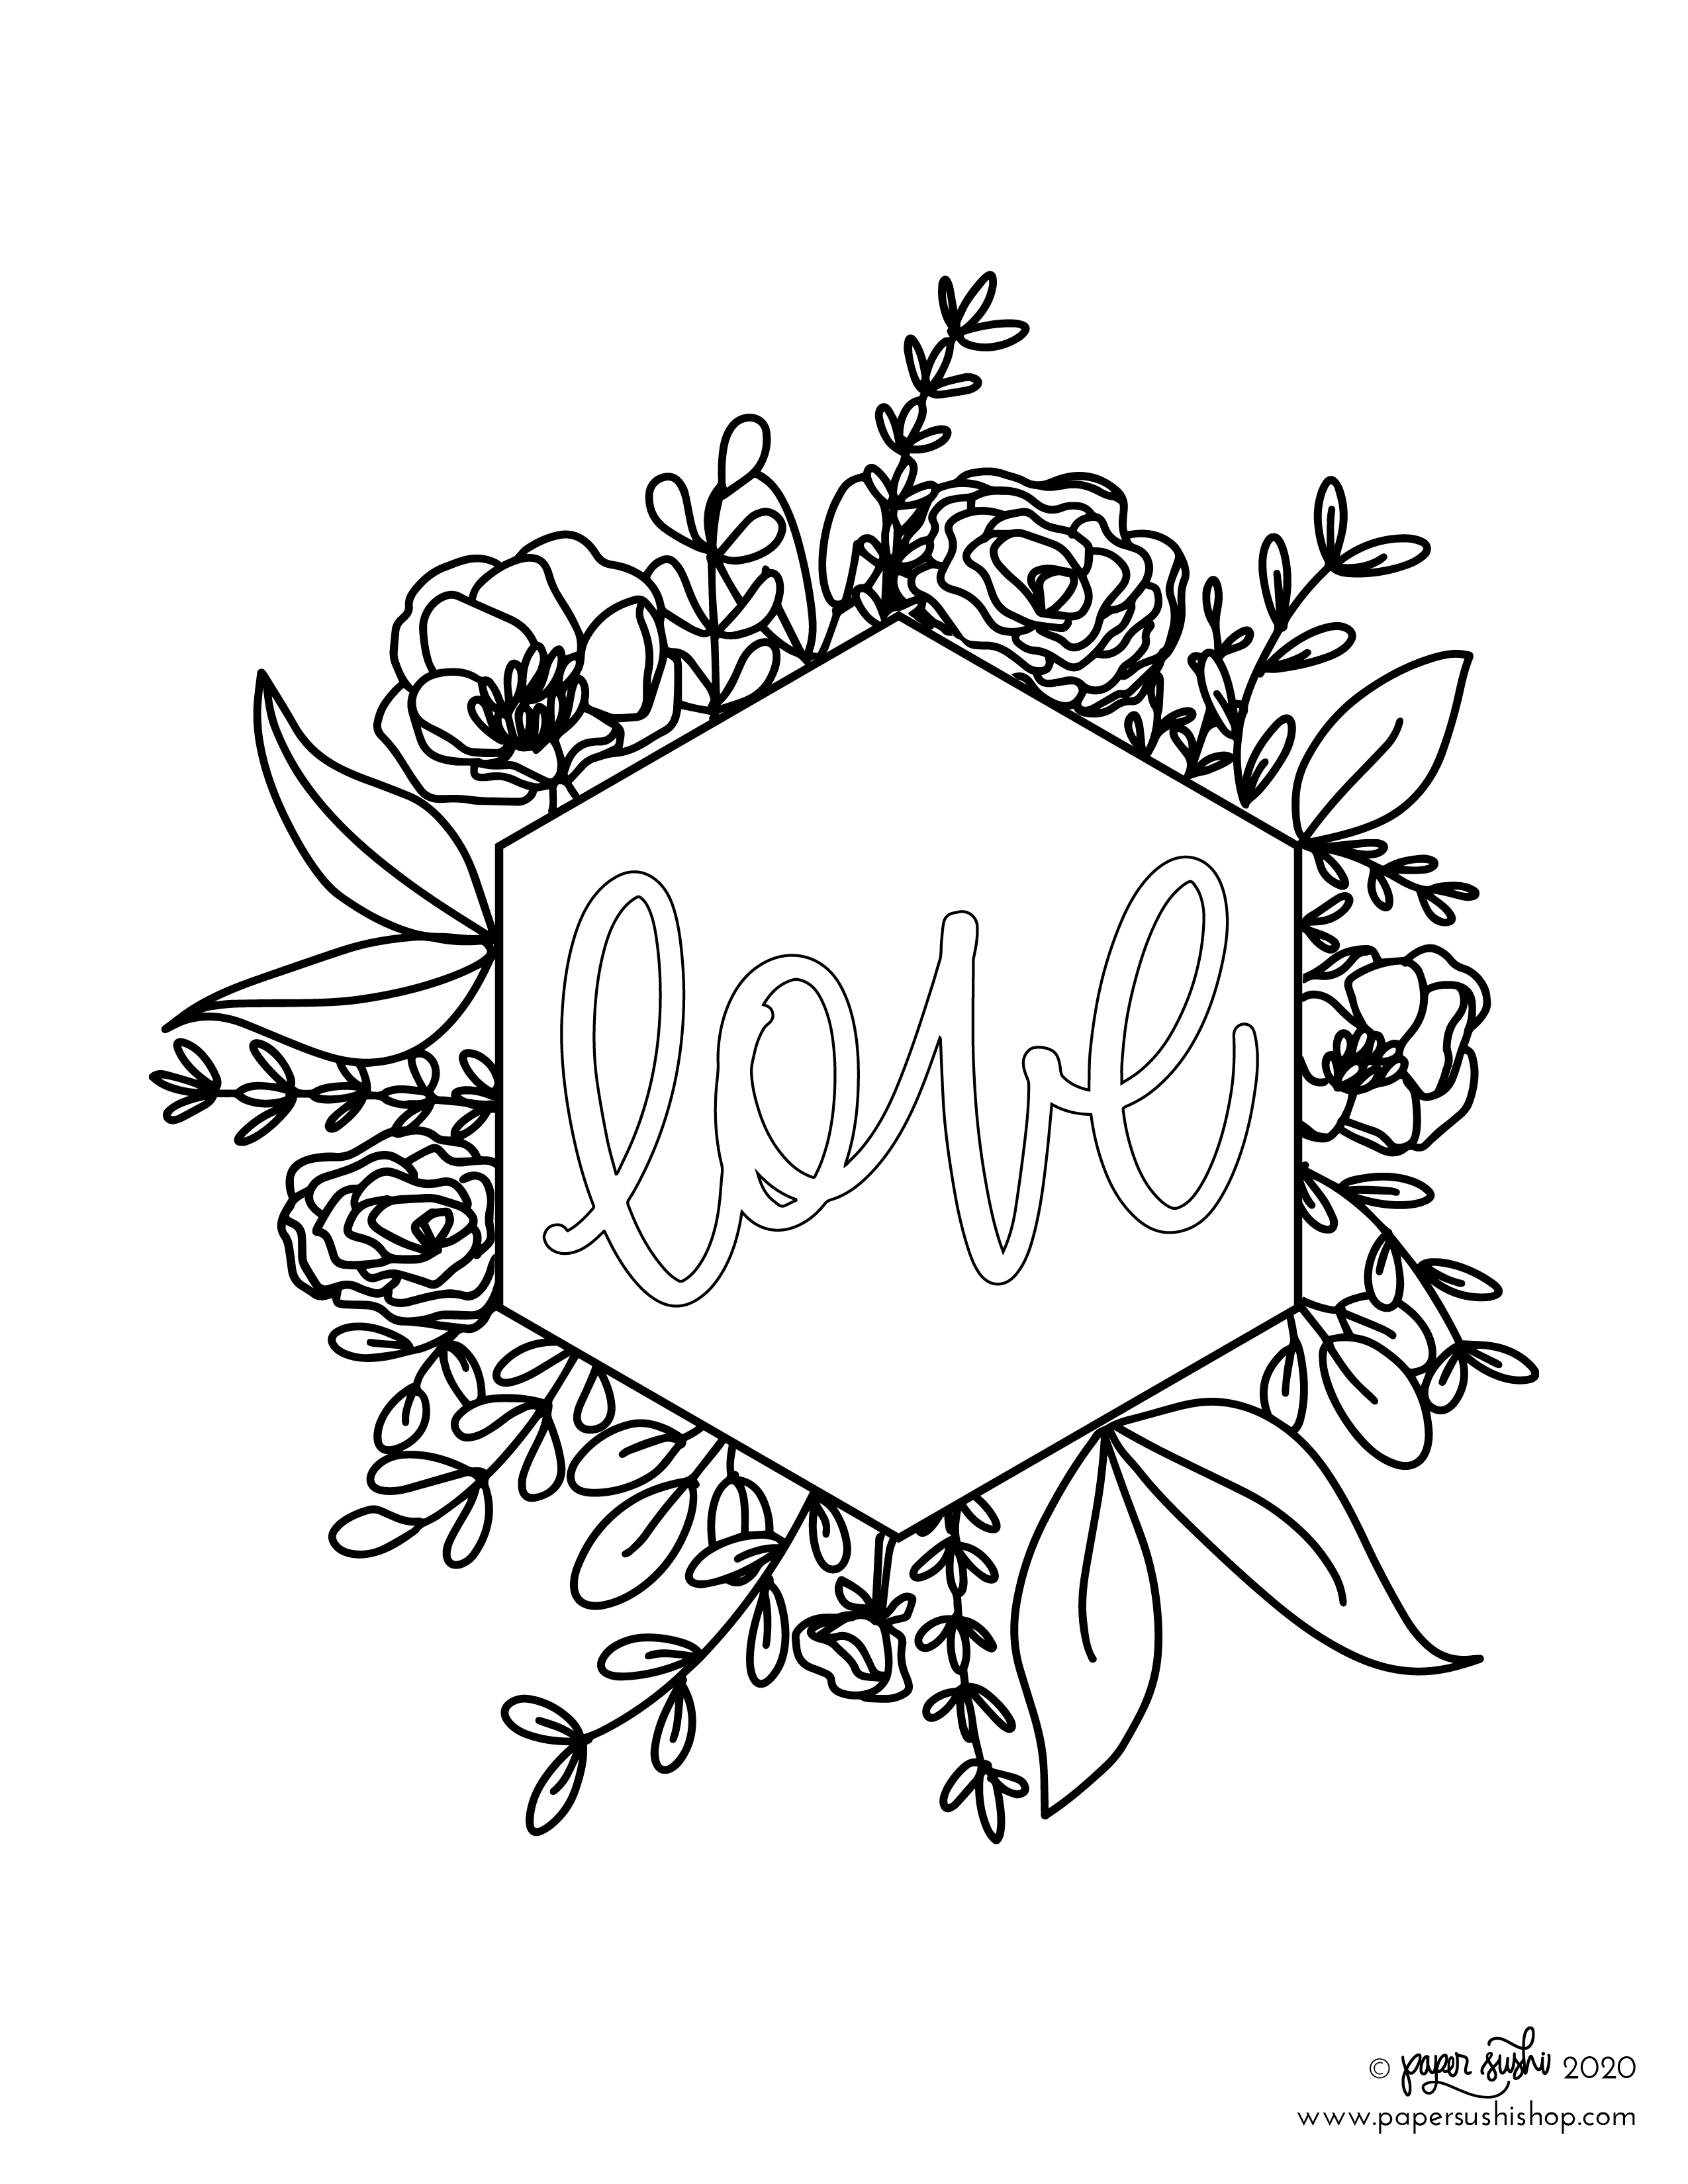 Free hand drawn and lettered coloring pages